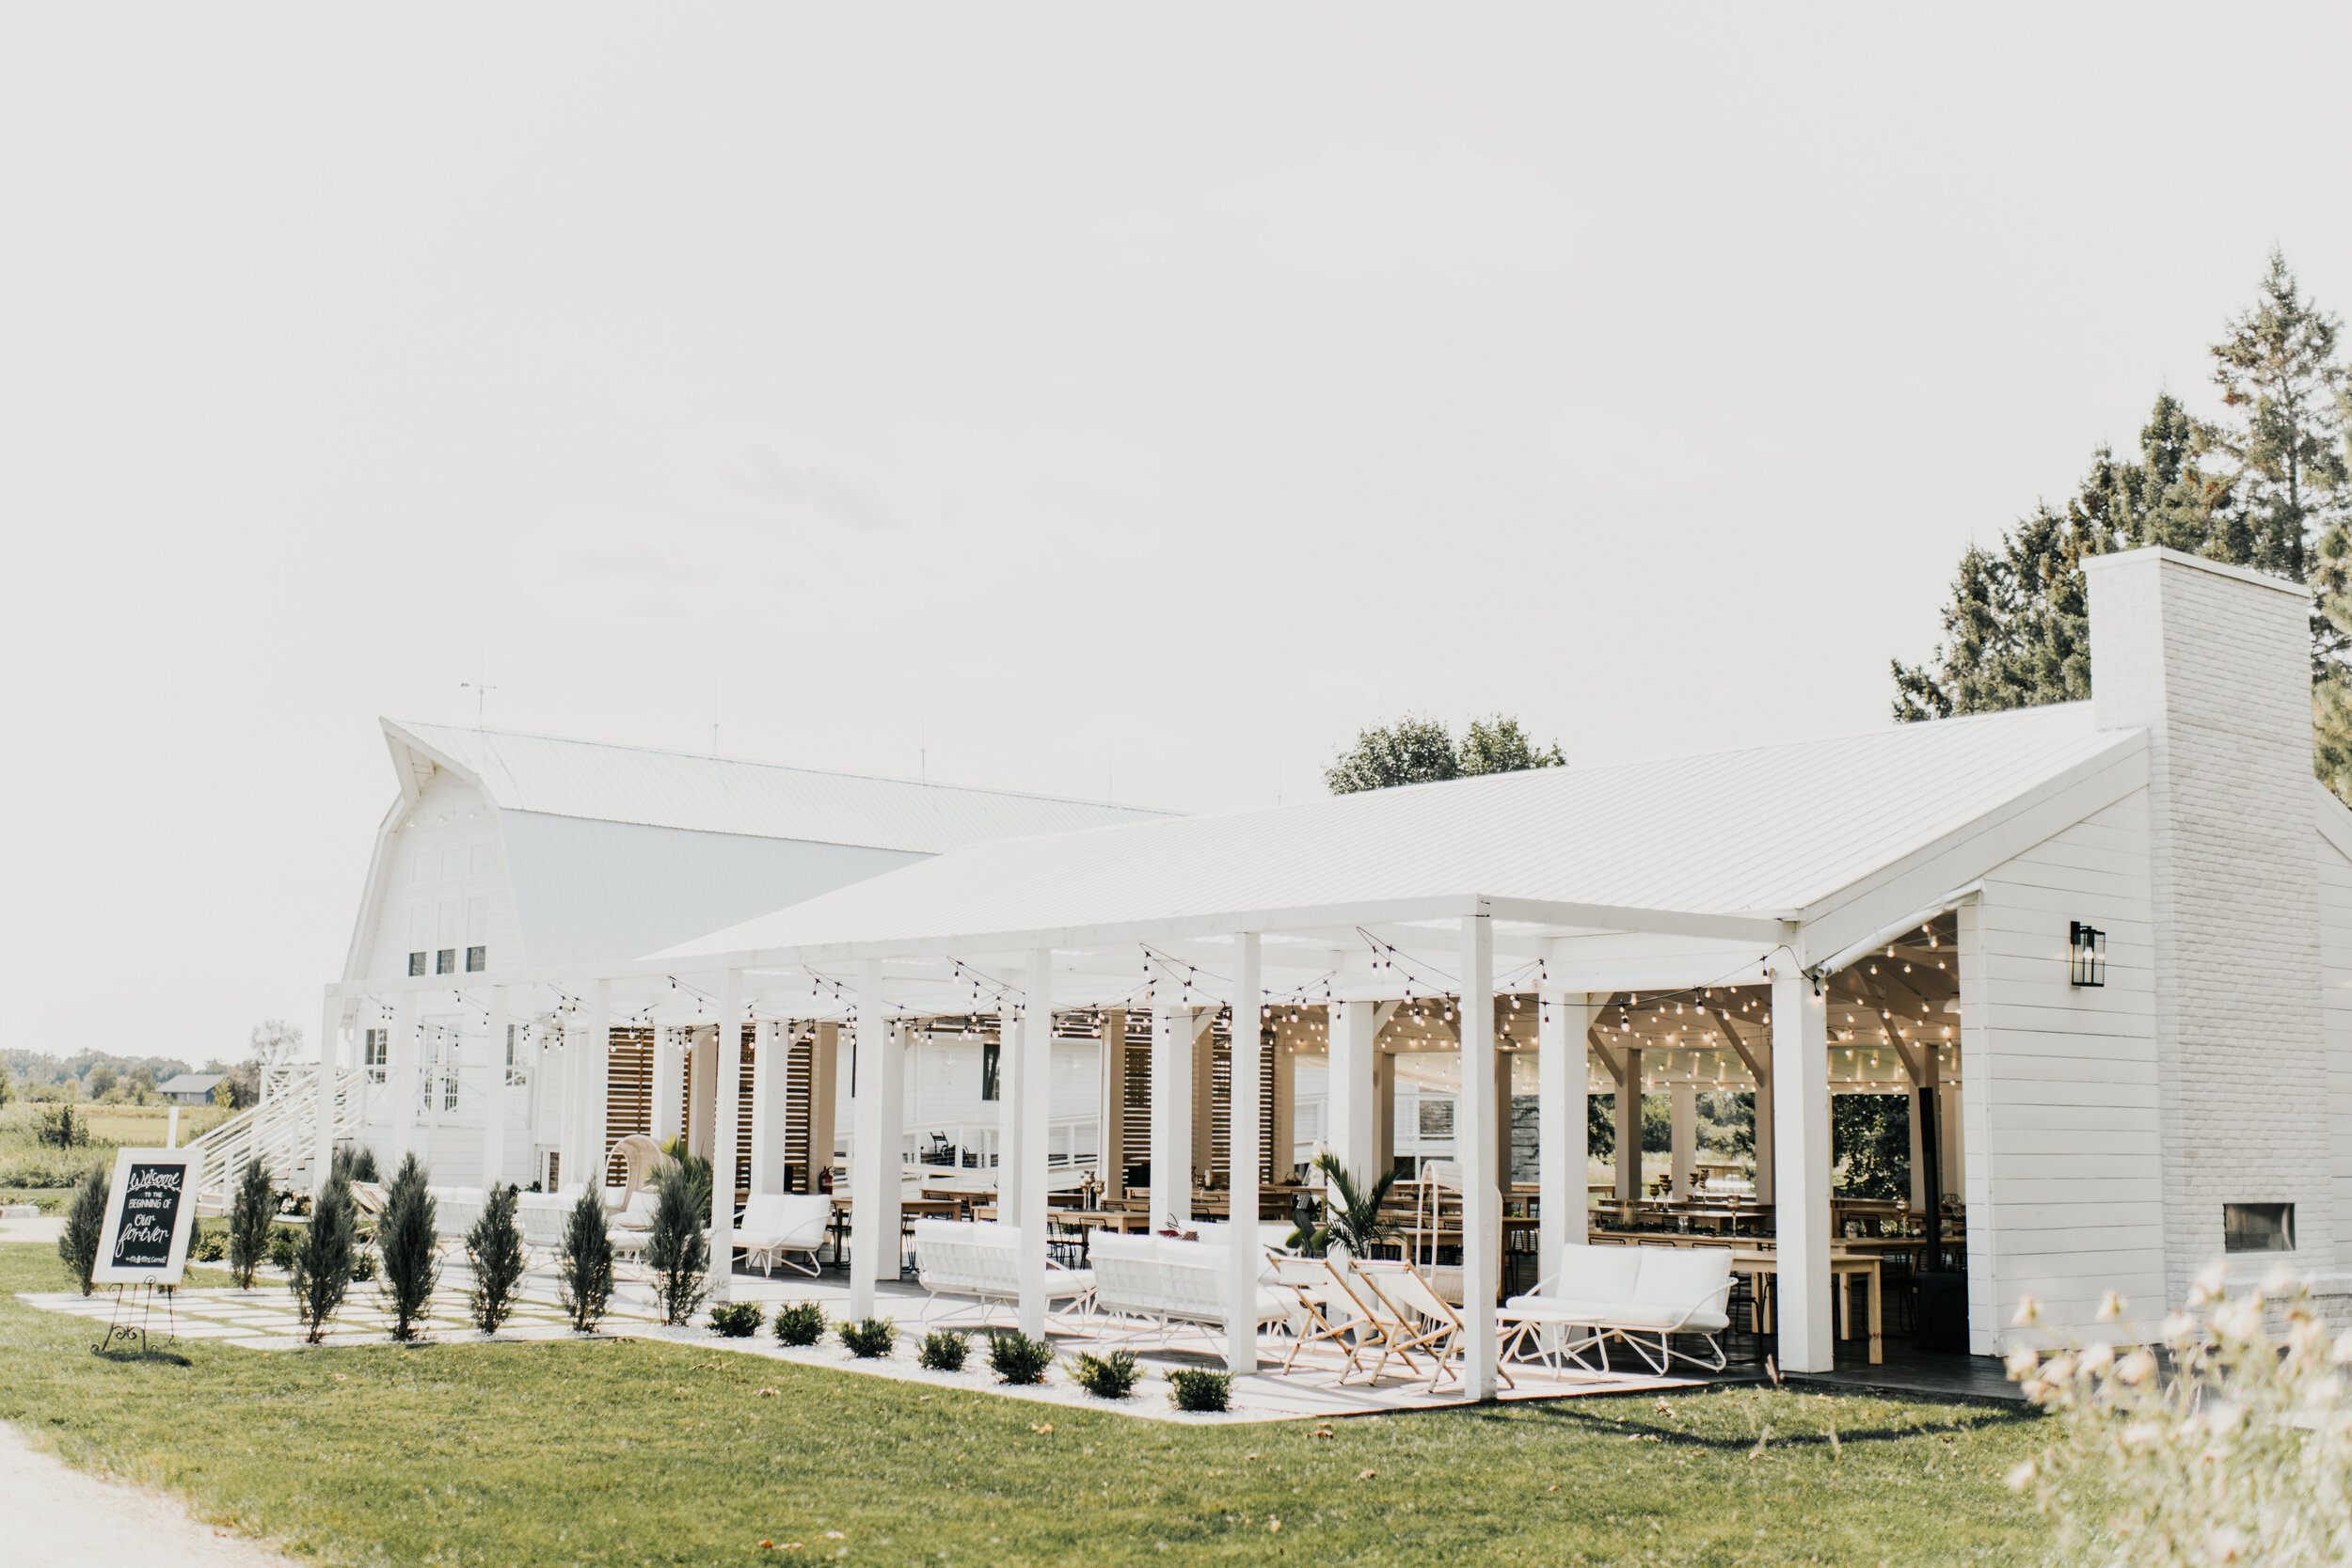 White modern farmhouse-style wedding venue with a covered patio and large windows, set in a lush, green landscape under a clear sky. This venue is called Ivory North